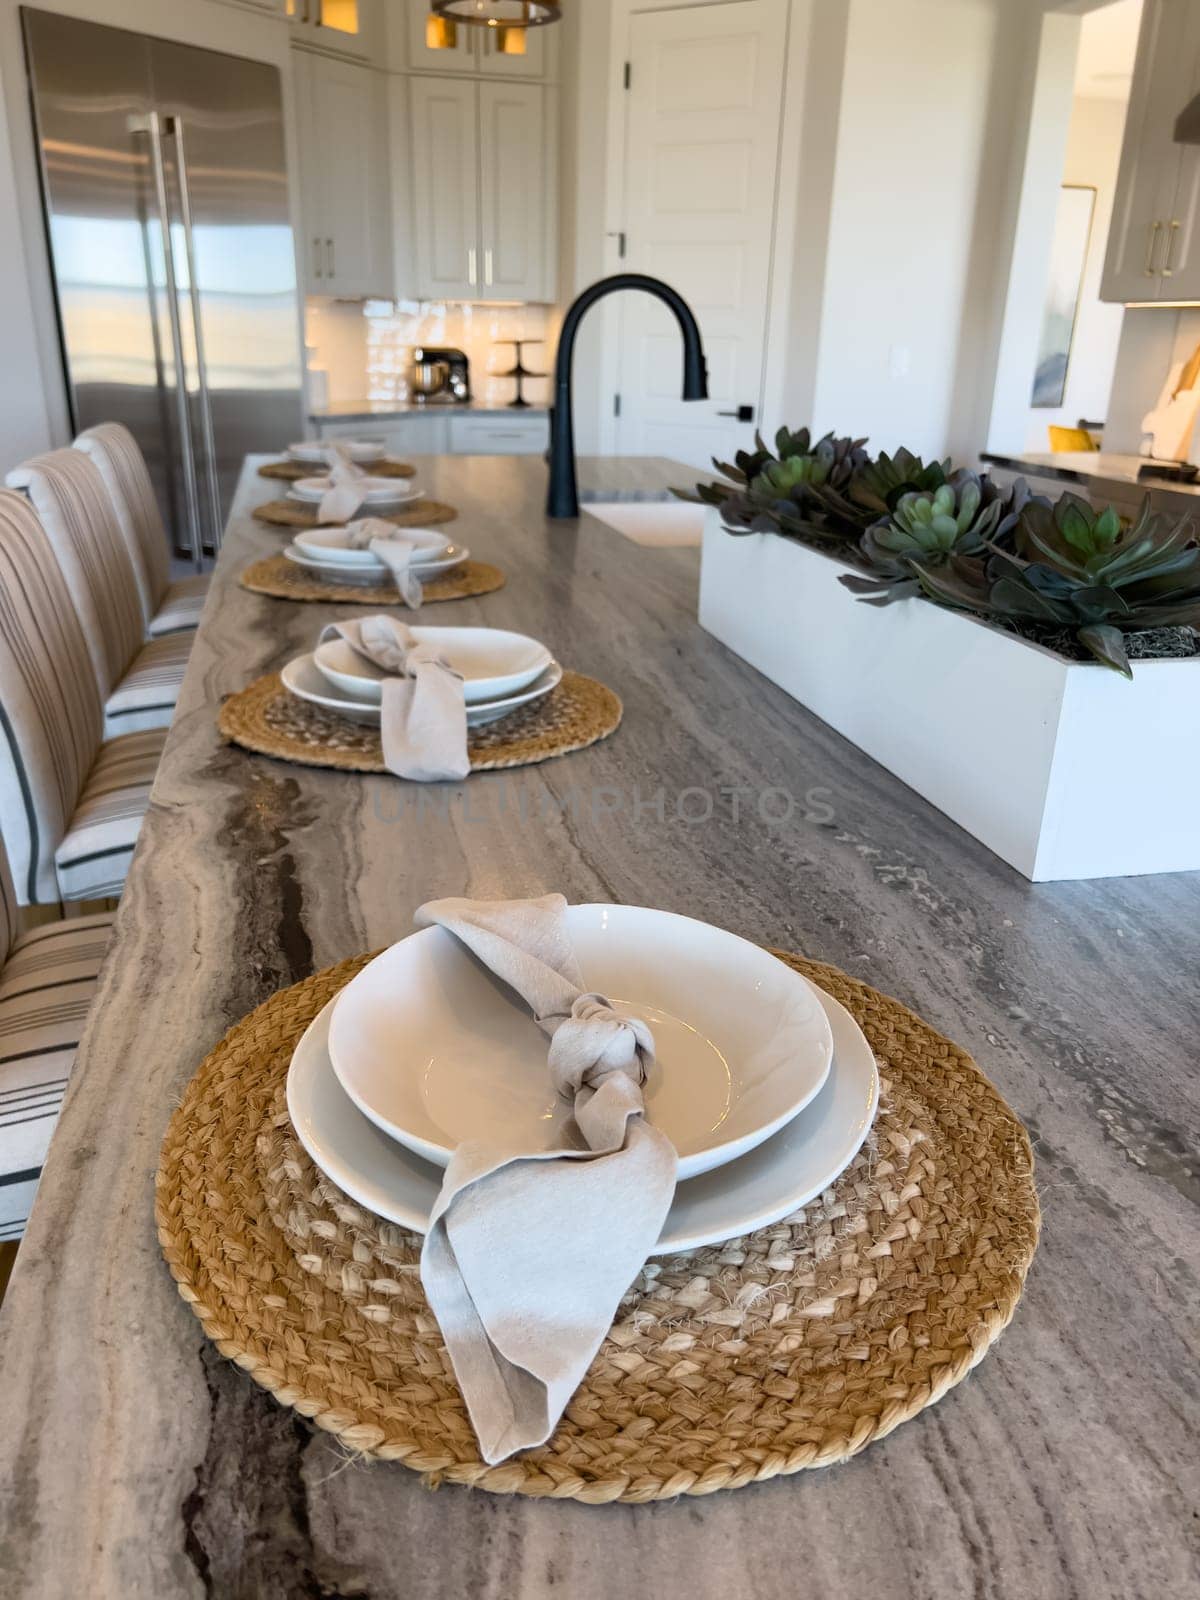 This inviting kitchen boasts a long dining table set for a family meal, with modern pendant lighting overhead and a sleek kitchen island that promises memorable gatherings and culinary adventures.